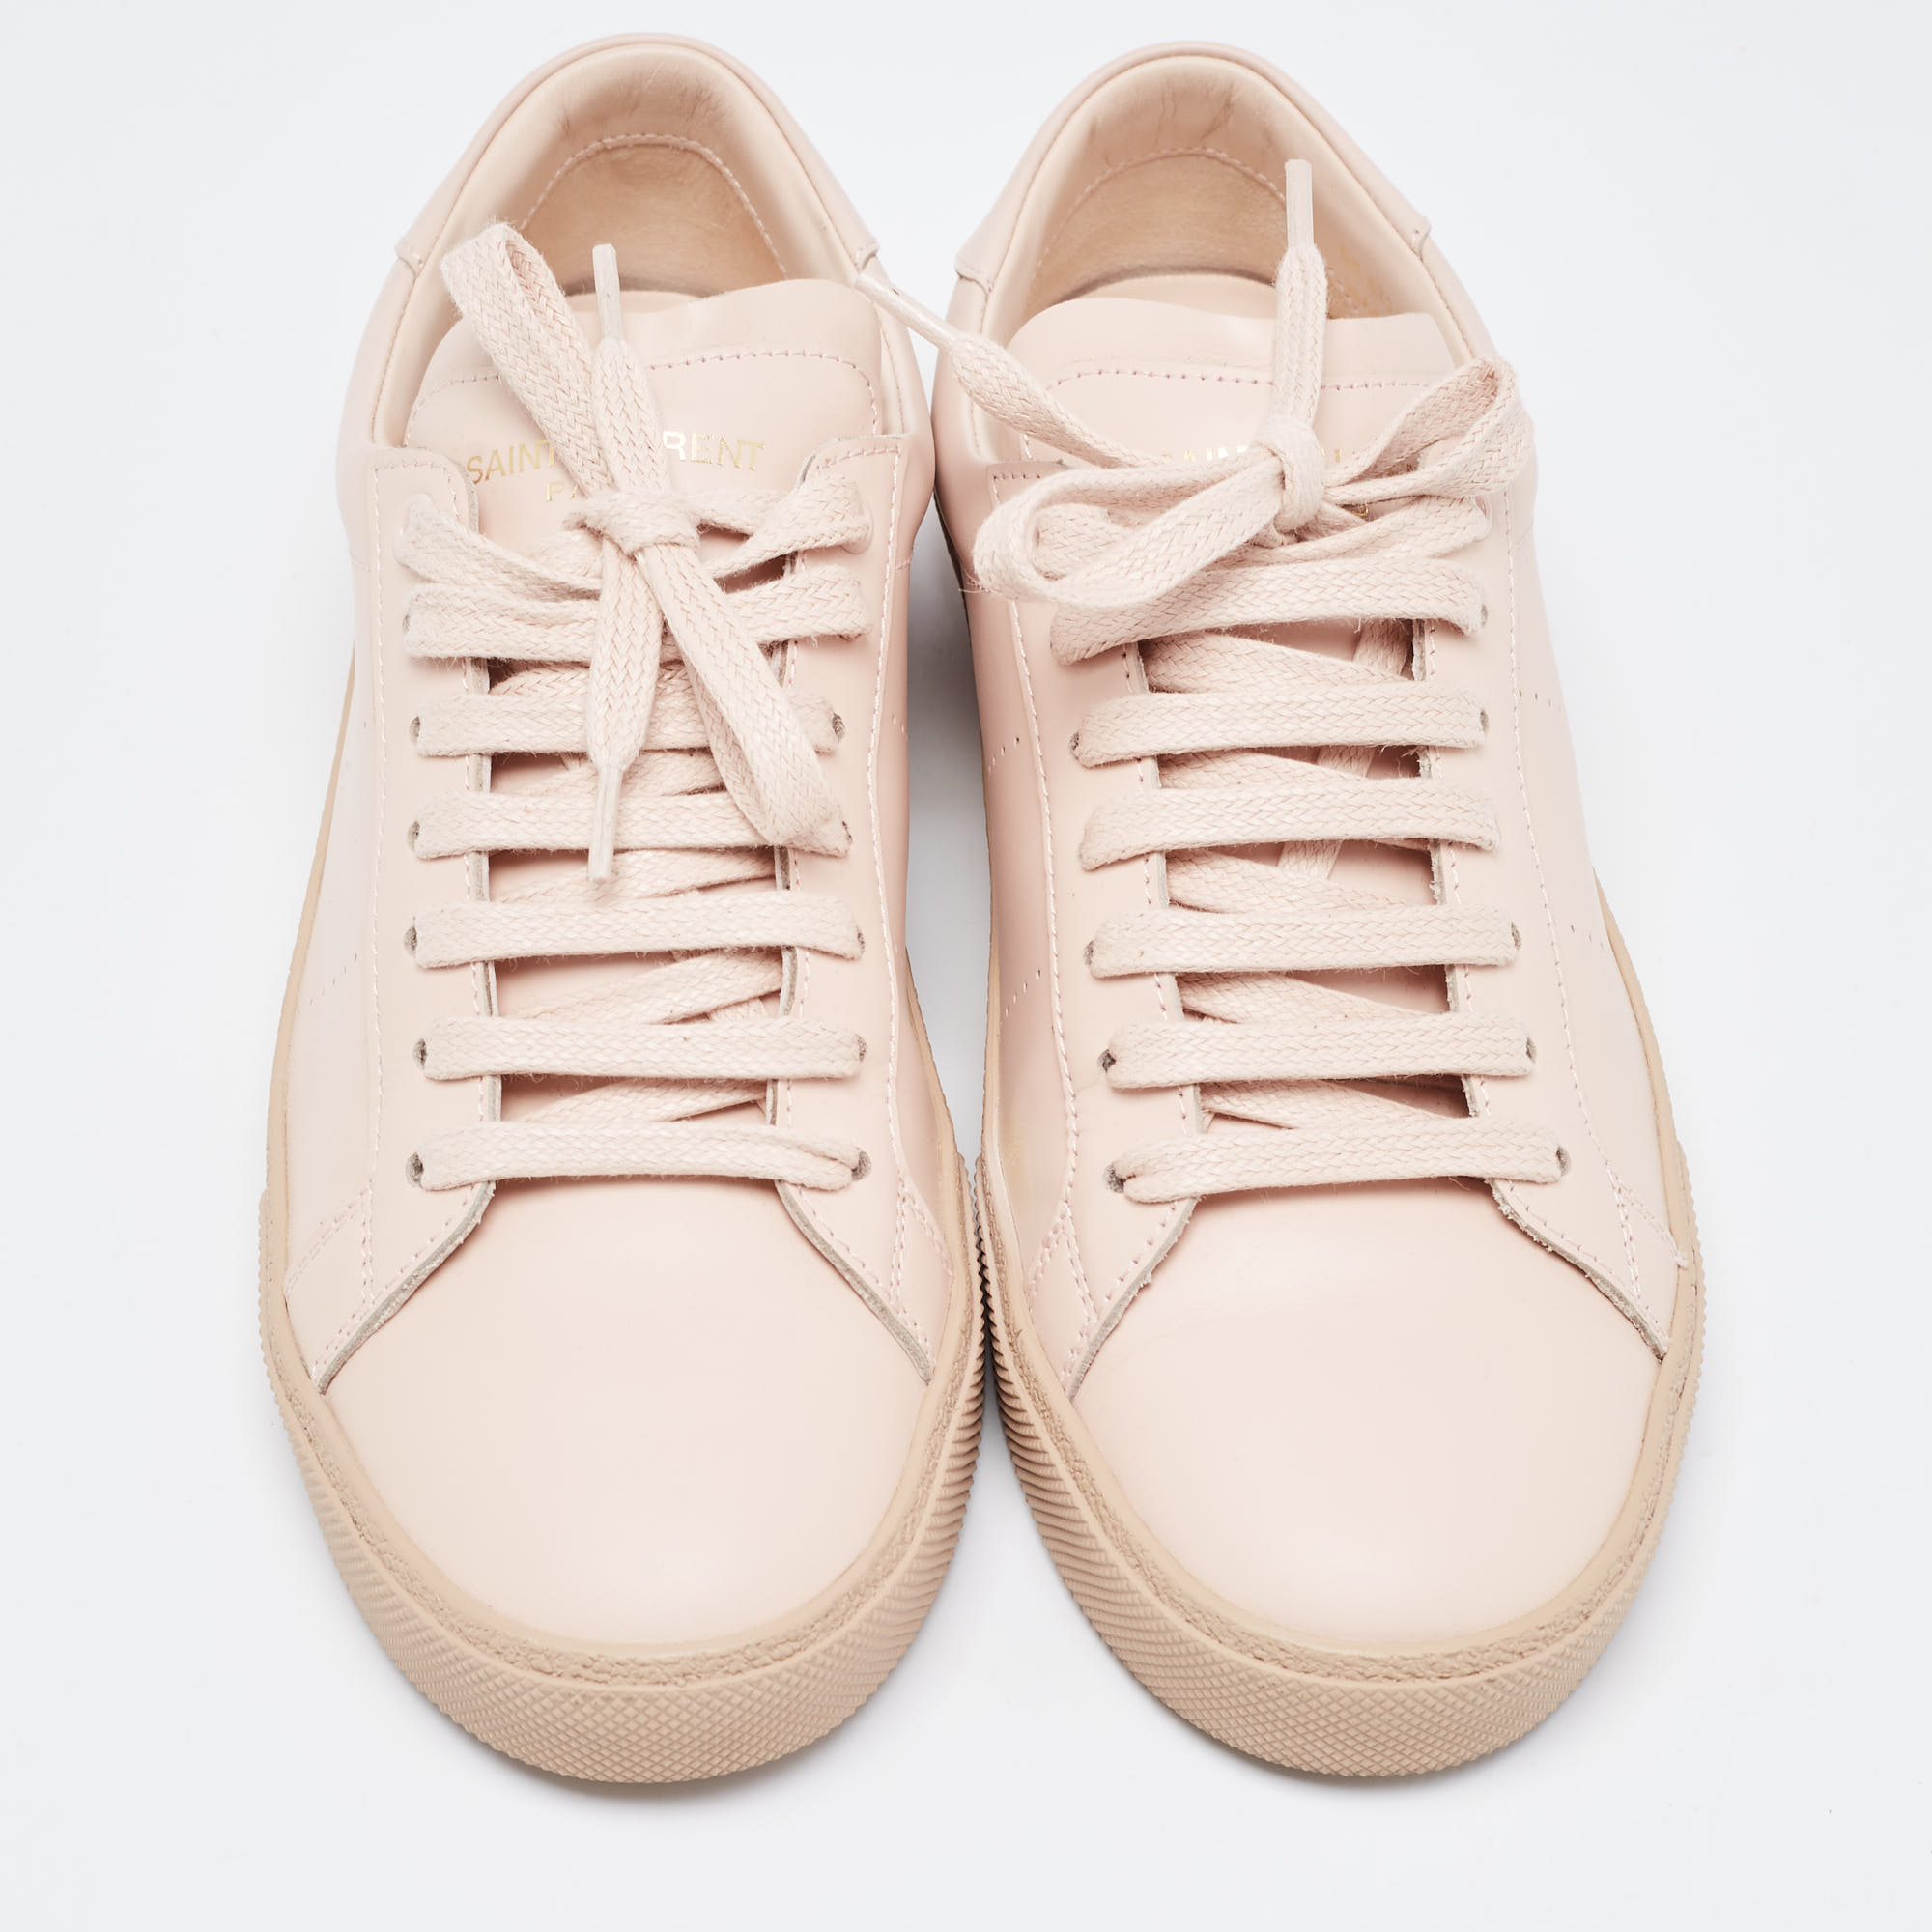 Saint Laurent Pink Leather Andy Low Top Sneakers Size 37